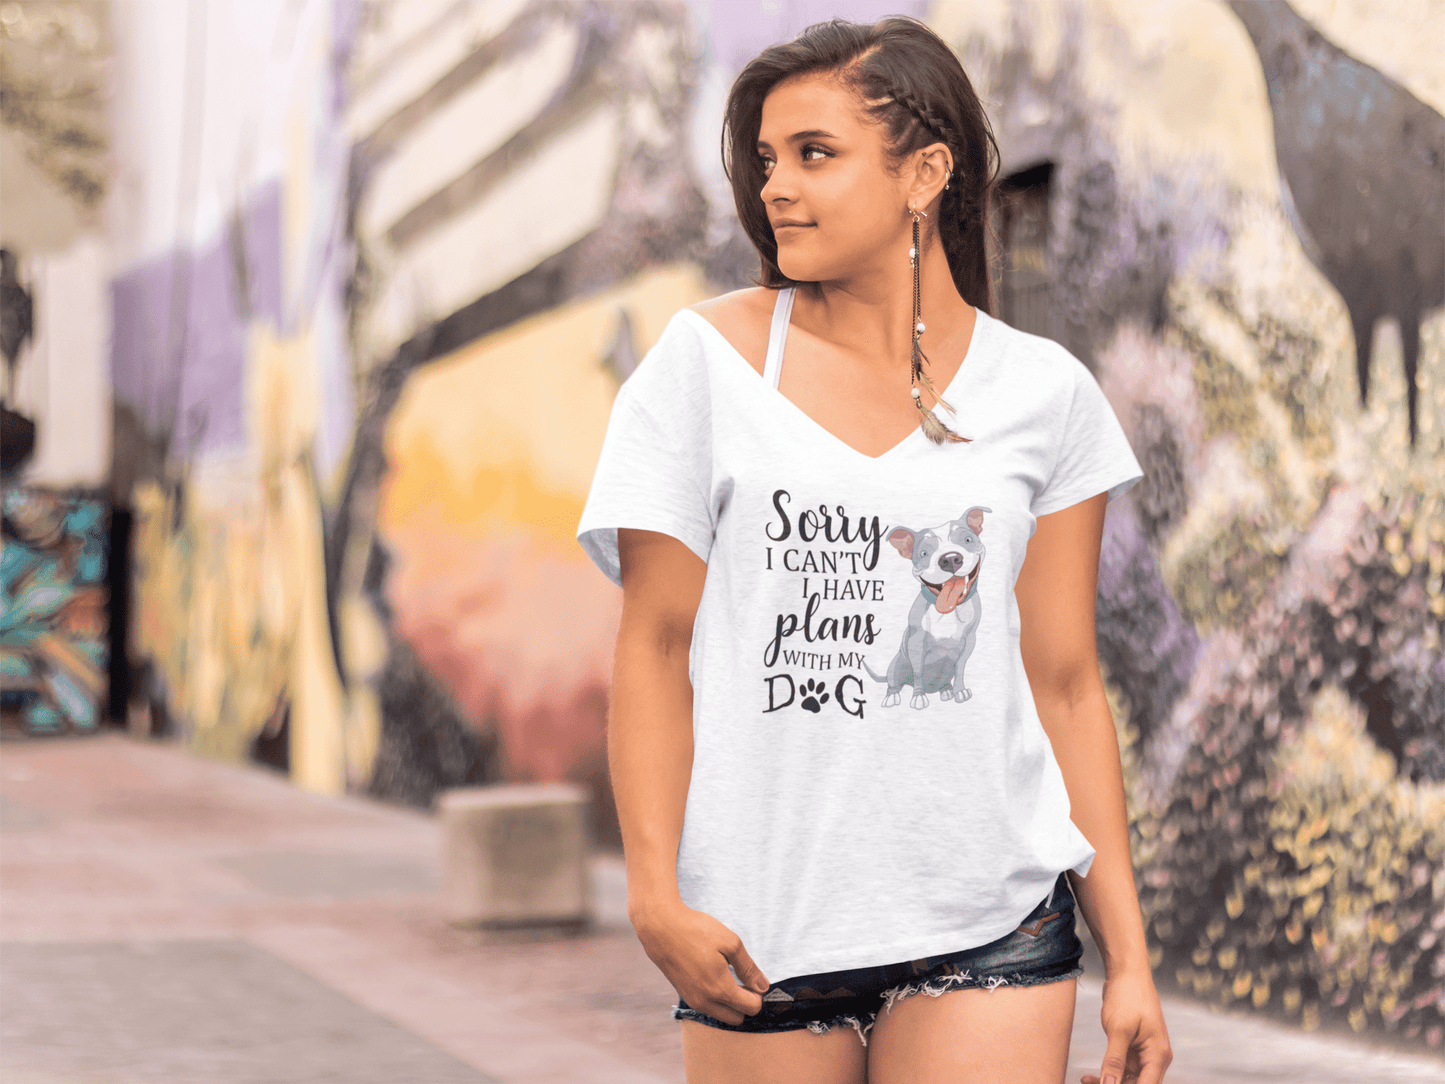 ULTRABASIC Women's T-Shirt Sorry I Can't I Have Plans With My Dog - Funny Pitbull Dog Lover Tee Shirt for Ladies